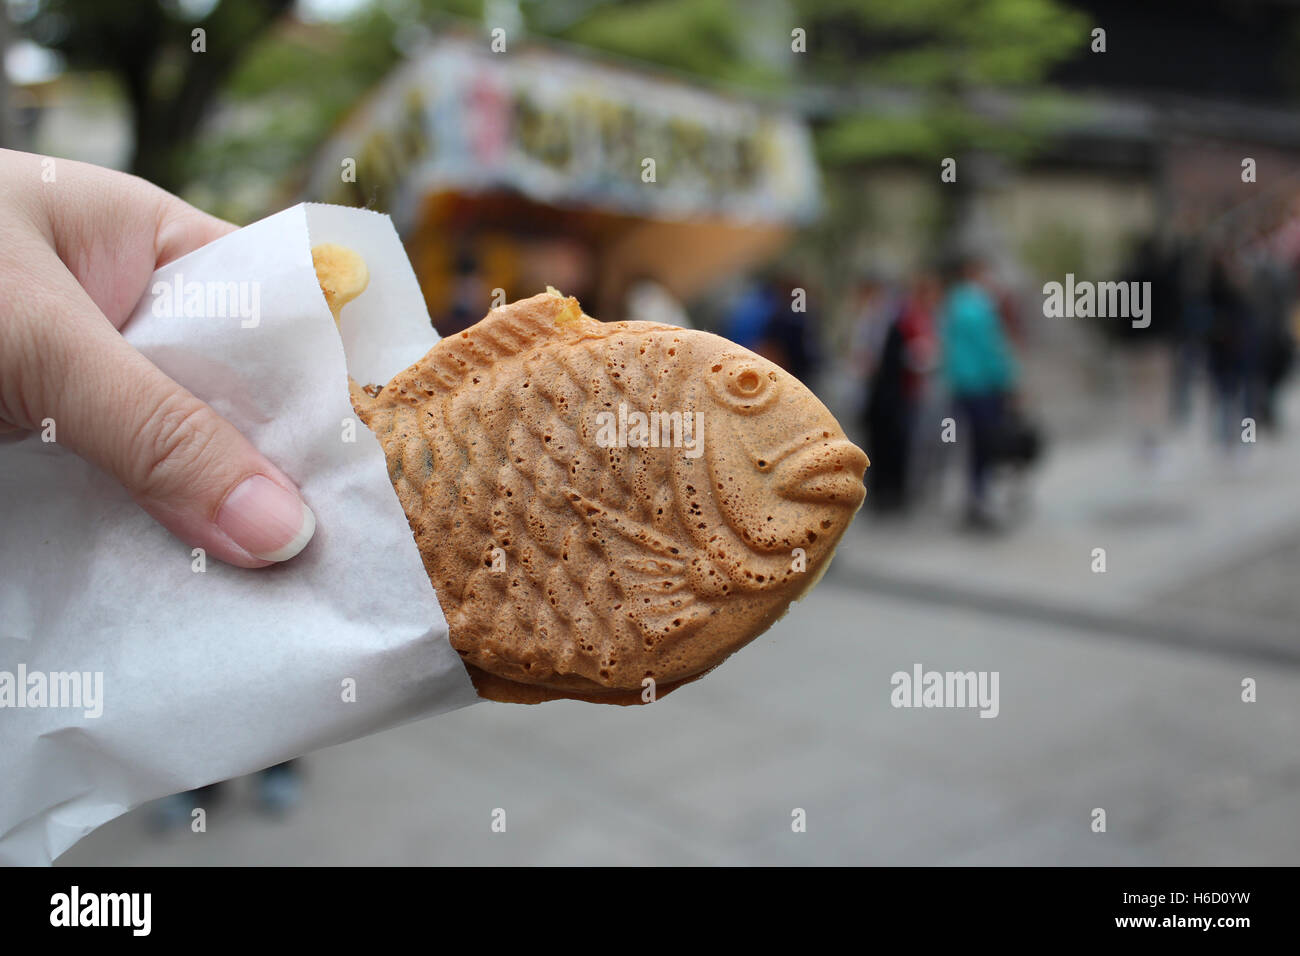 Taiyaki is fish-shaped pancake stuffed with sweetened red bean paste as a common street snack in Japan Stock Photo